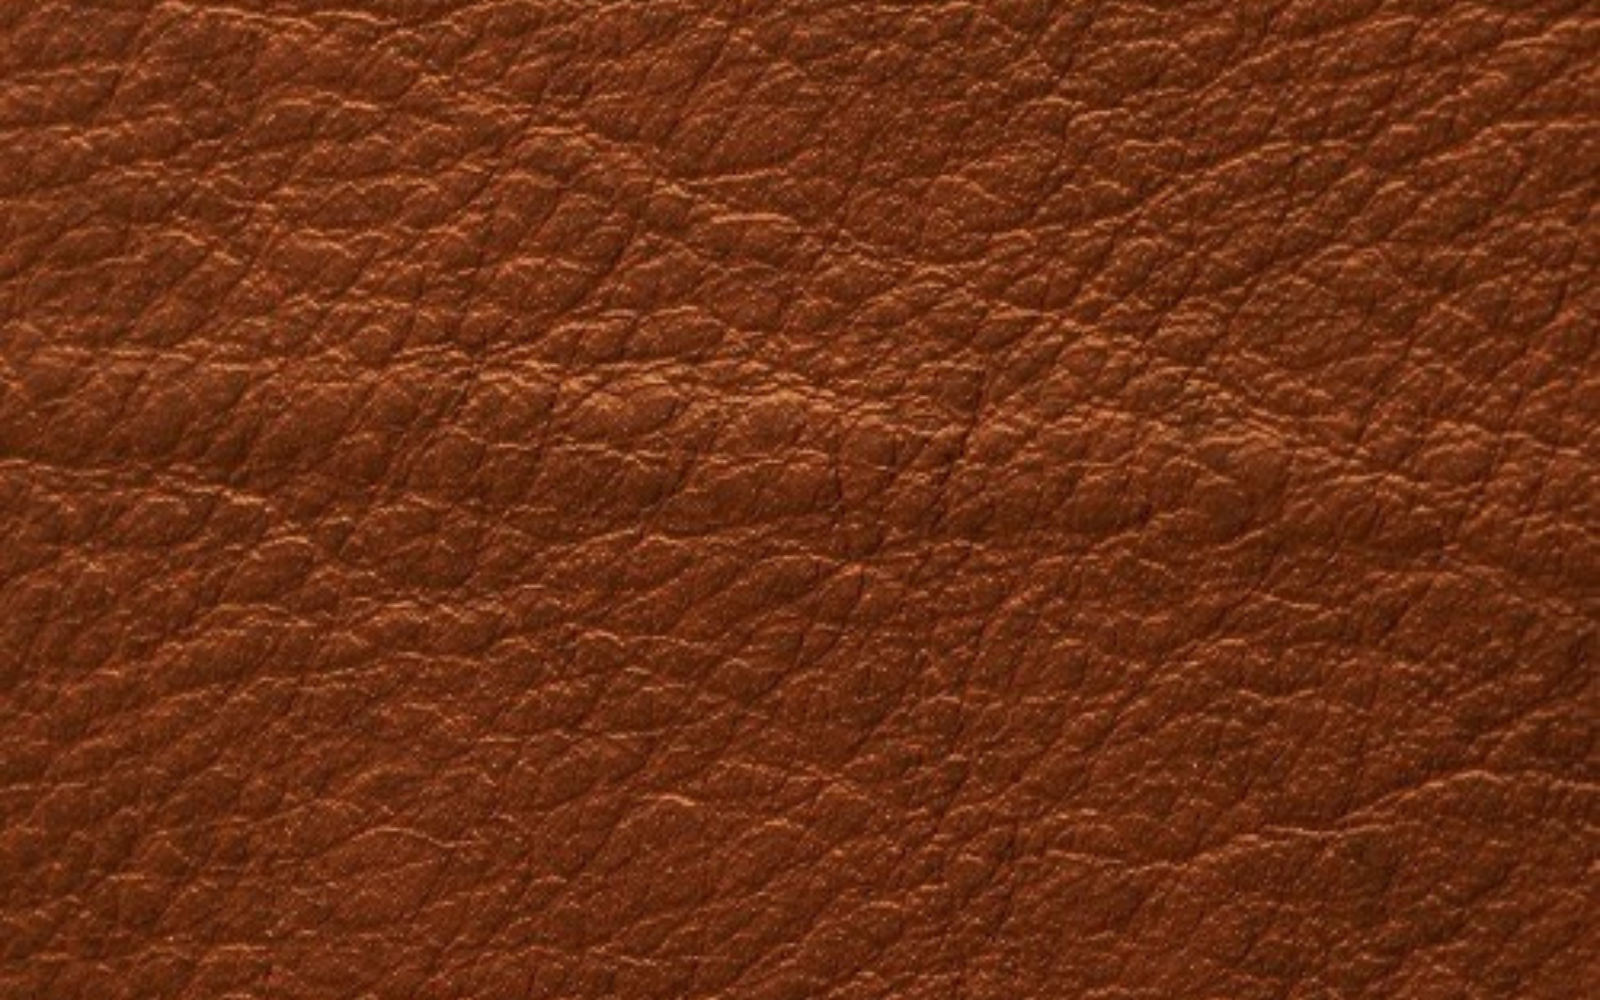 Scar on leather hide